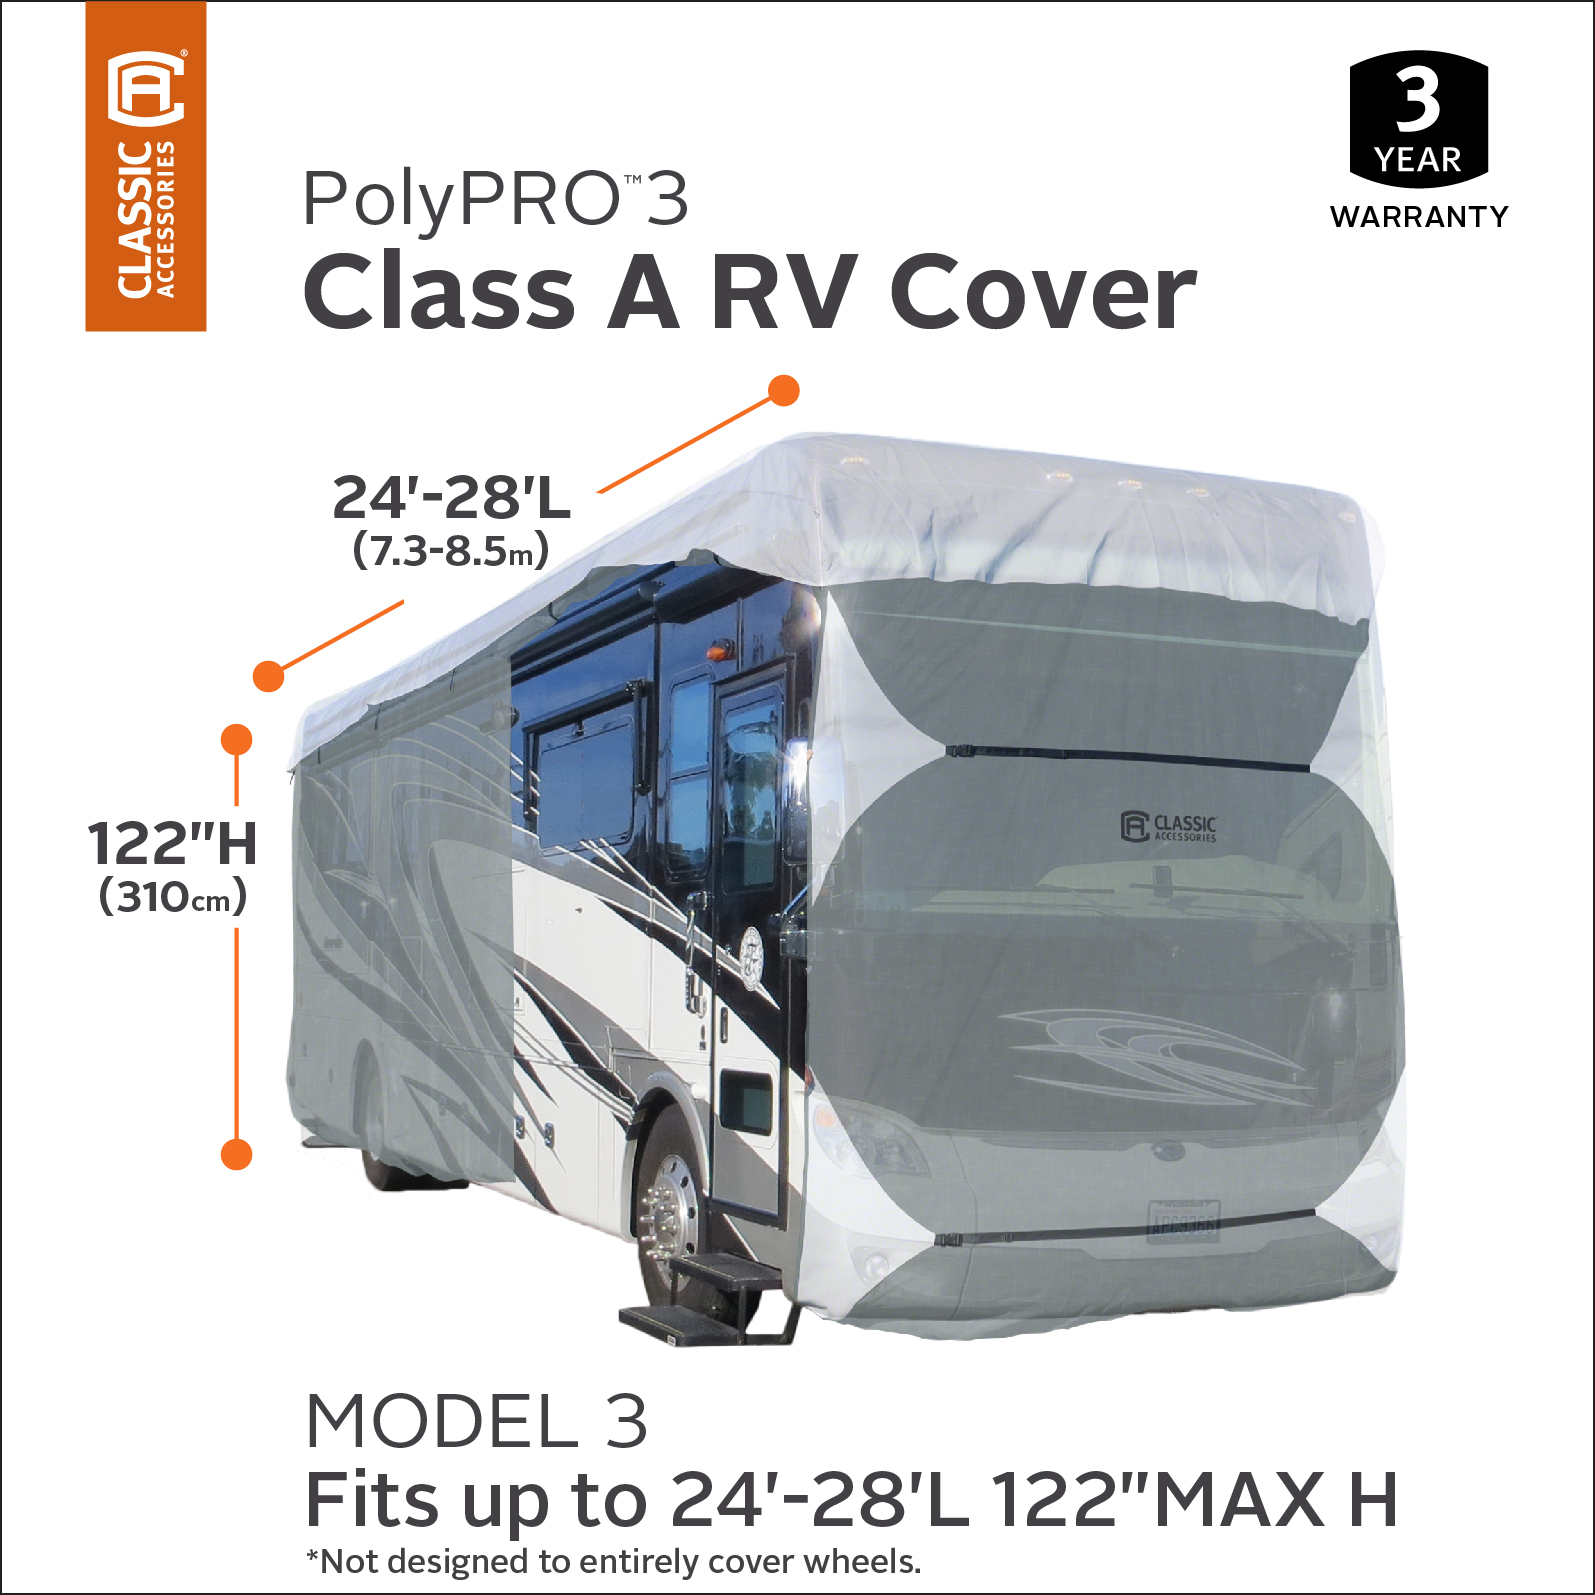 Classic Accessories OverDrive PolyPRO 3 Deluxe Class A RV Cover, Fits 24' - 28' RVs - Max Weather Protection with 3-Ply Poly Fabric Roof RV Cover (Model 3) - image 3 of 7